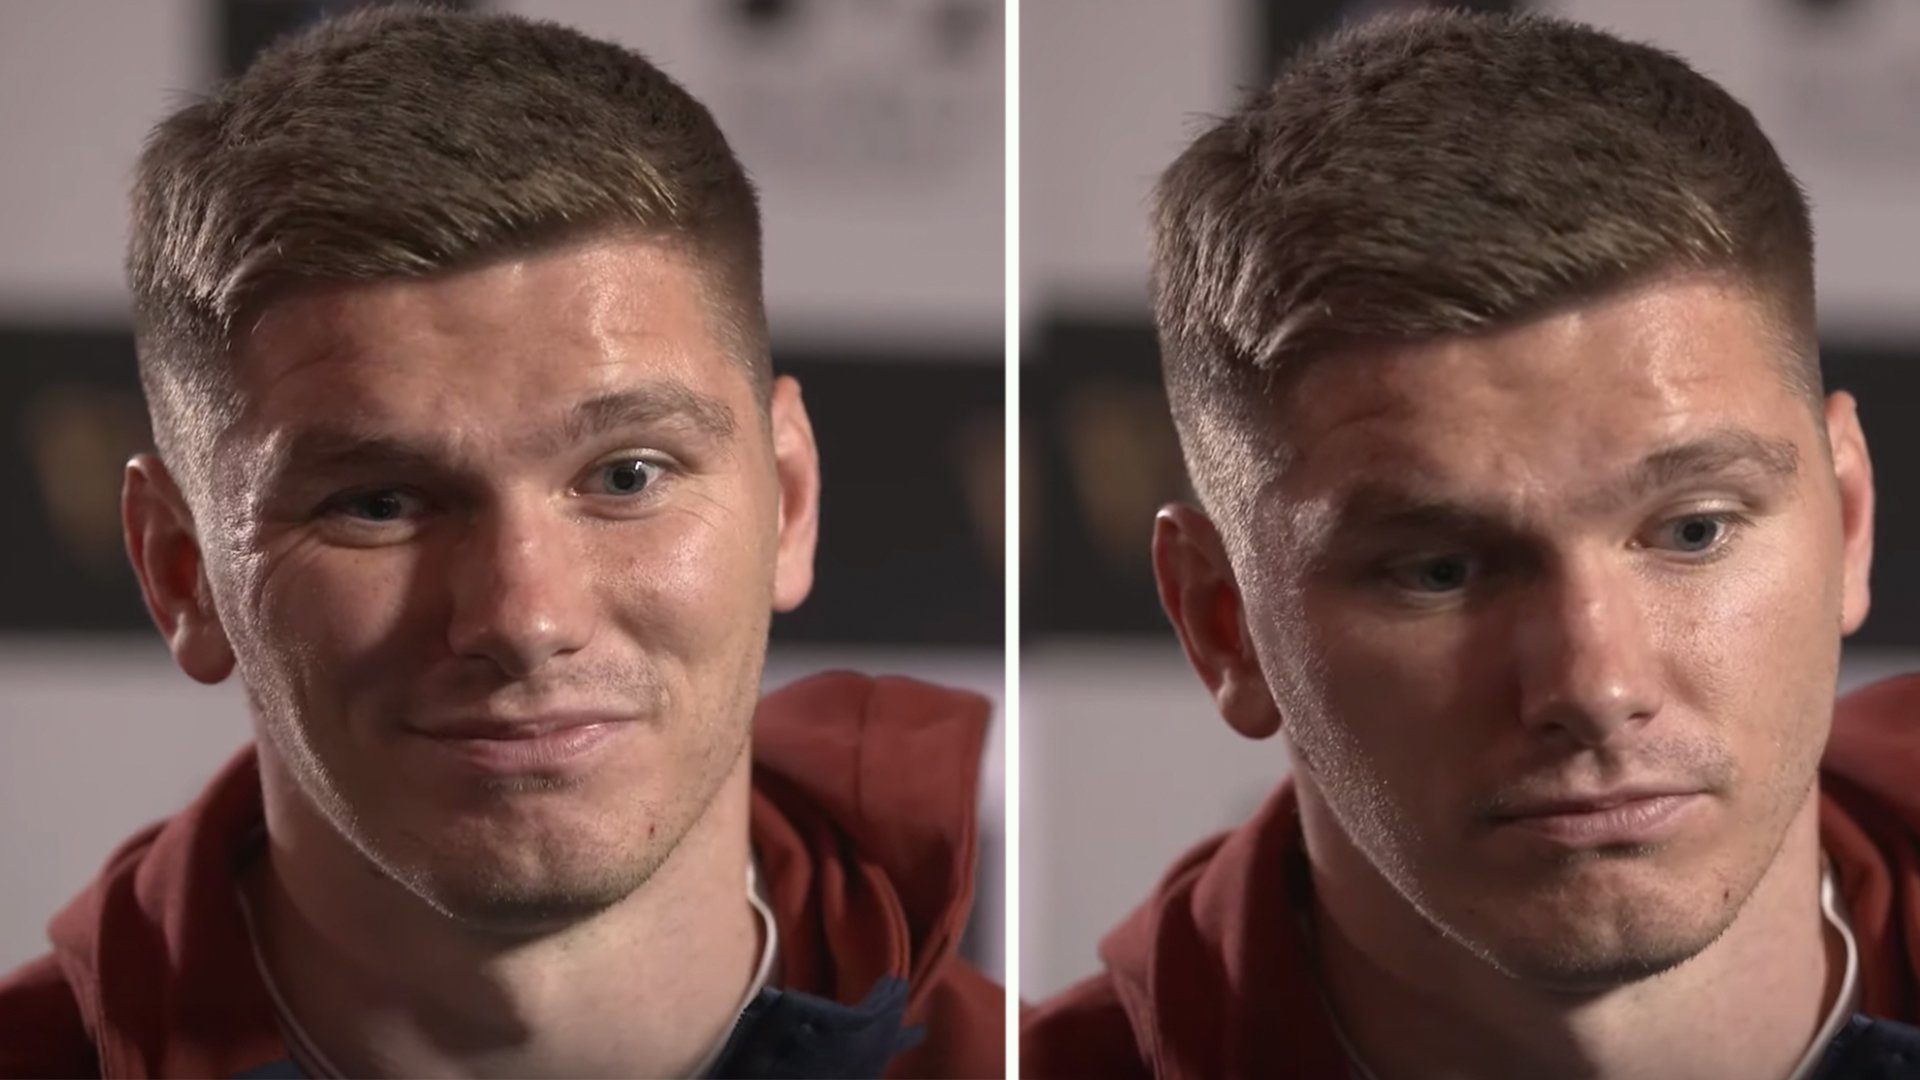 Owen Farrell interview takes awkward turn when his father is mentioned by interviewer